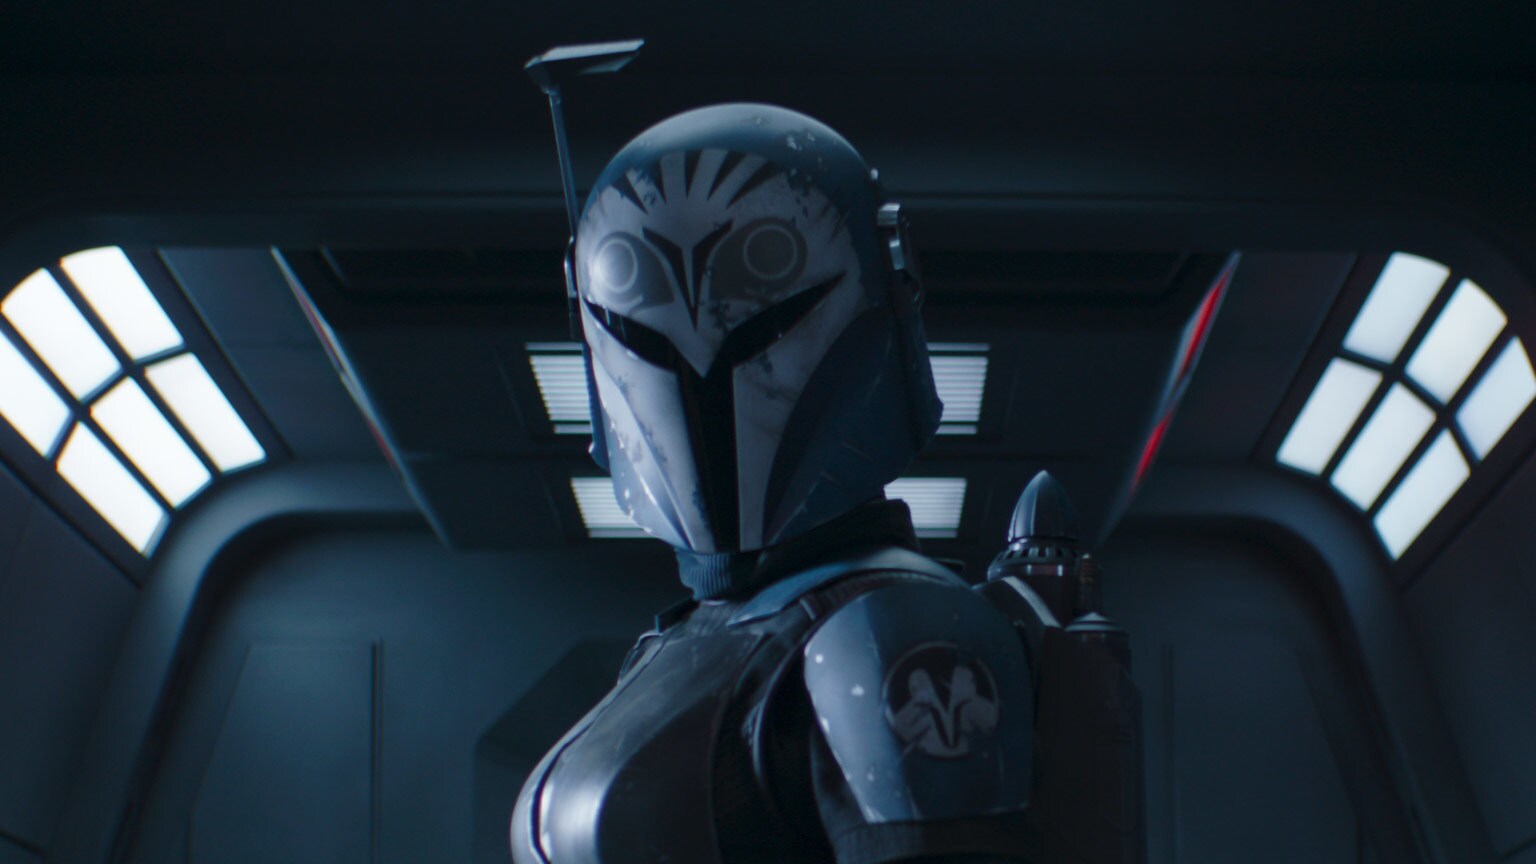 Bounty Hunting Highlights: 5 of Our Favorite Moments from The Mandalorian - “Chapter 11: The Heiress”